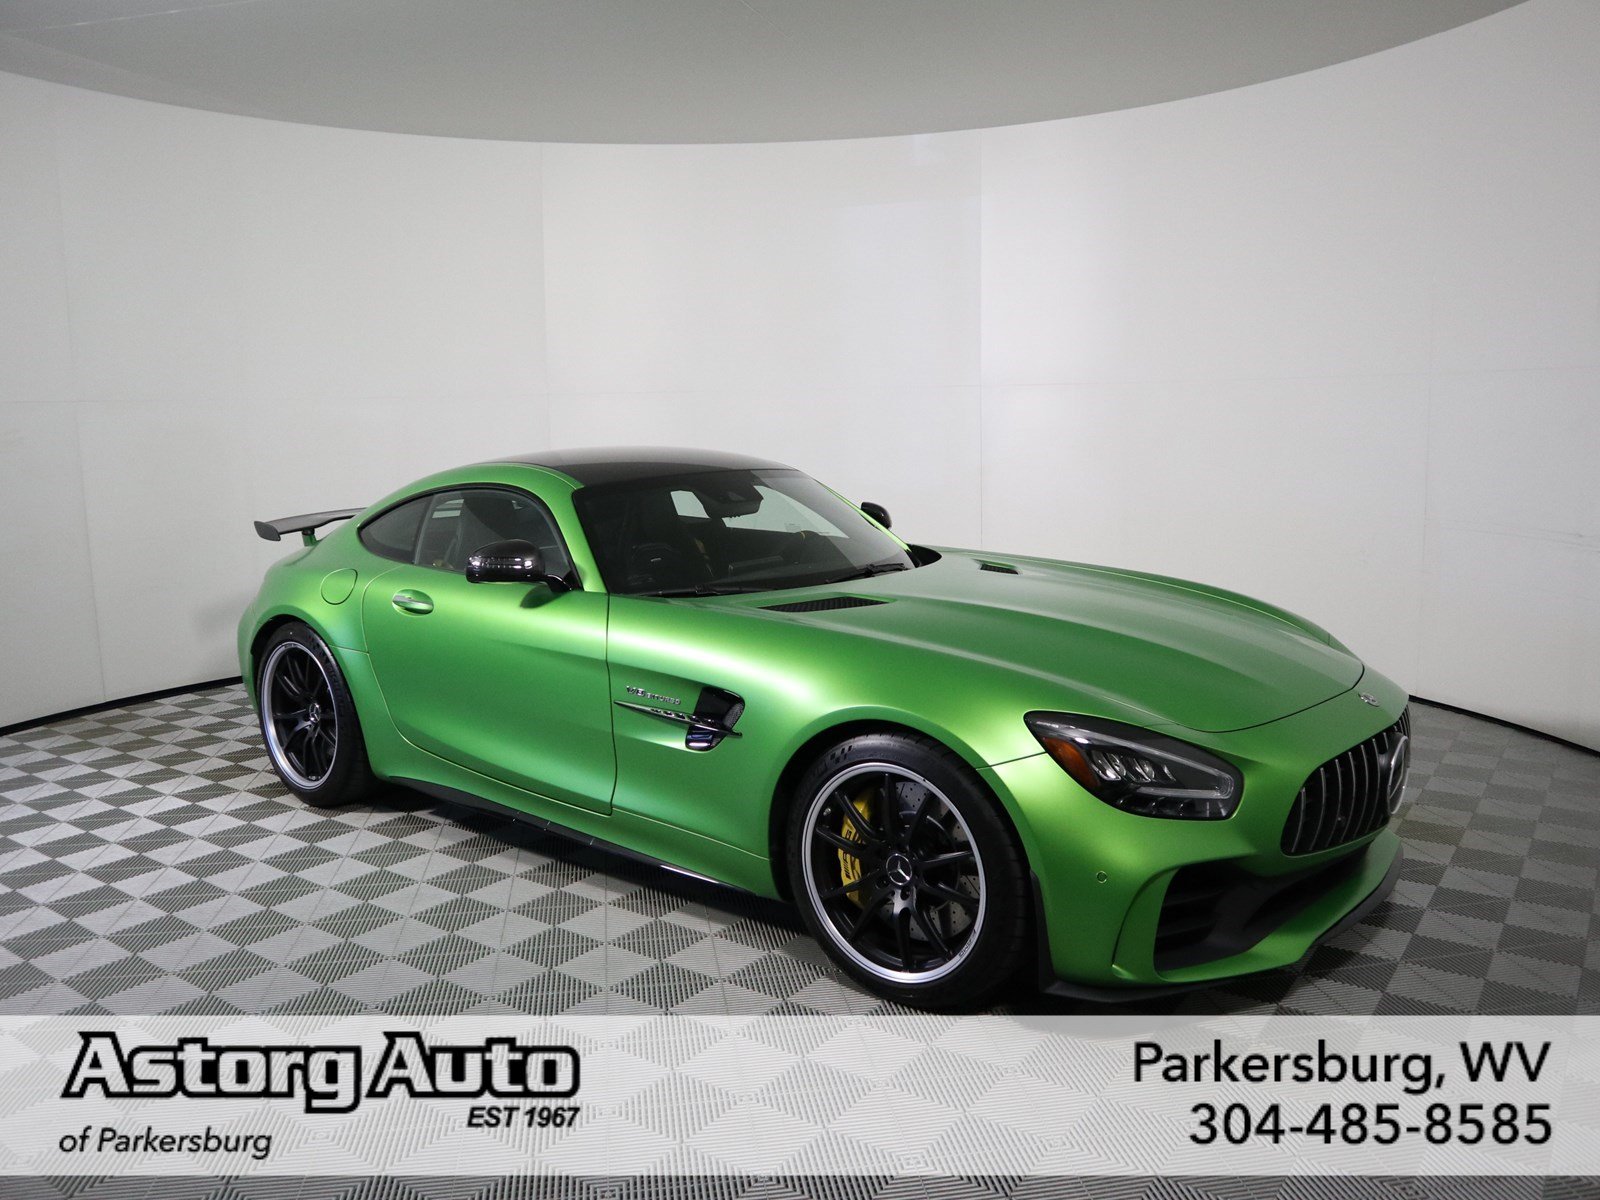 New 2020 Mercedes Benz Amg Gt R Rear Wheel Drive Coupe